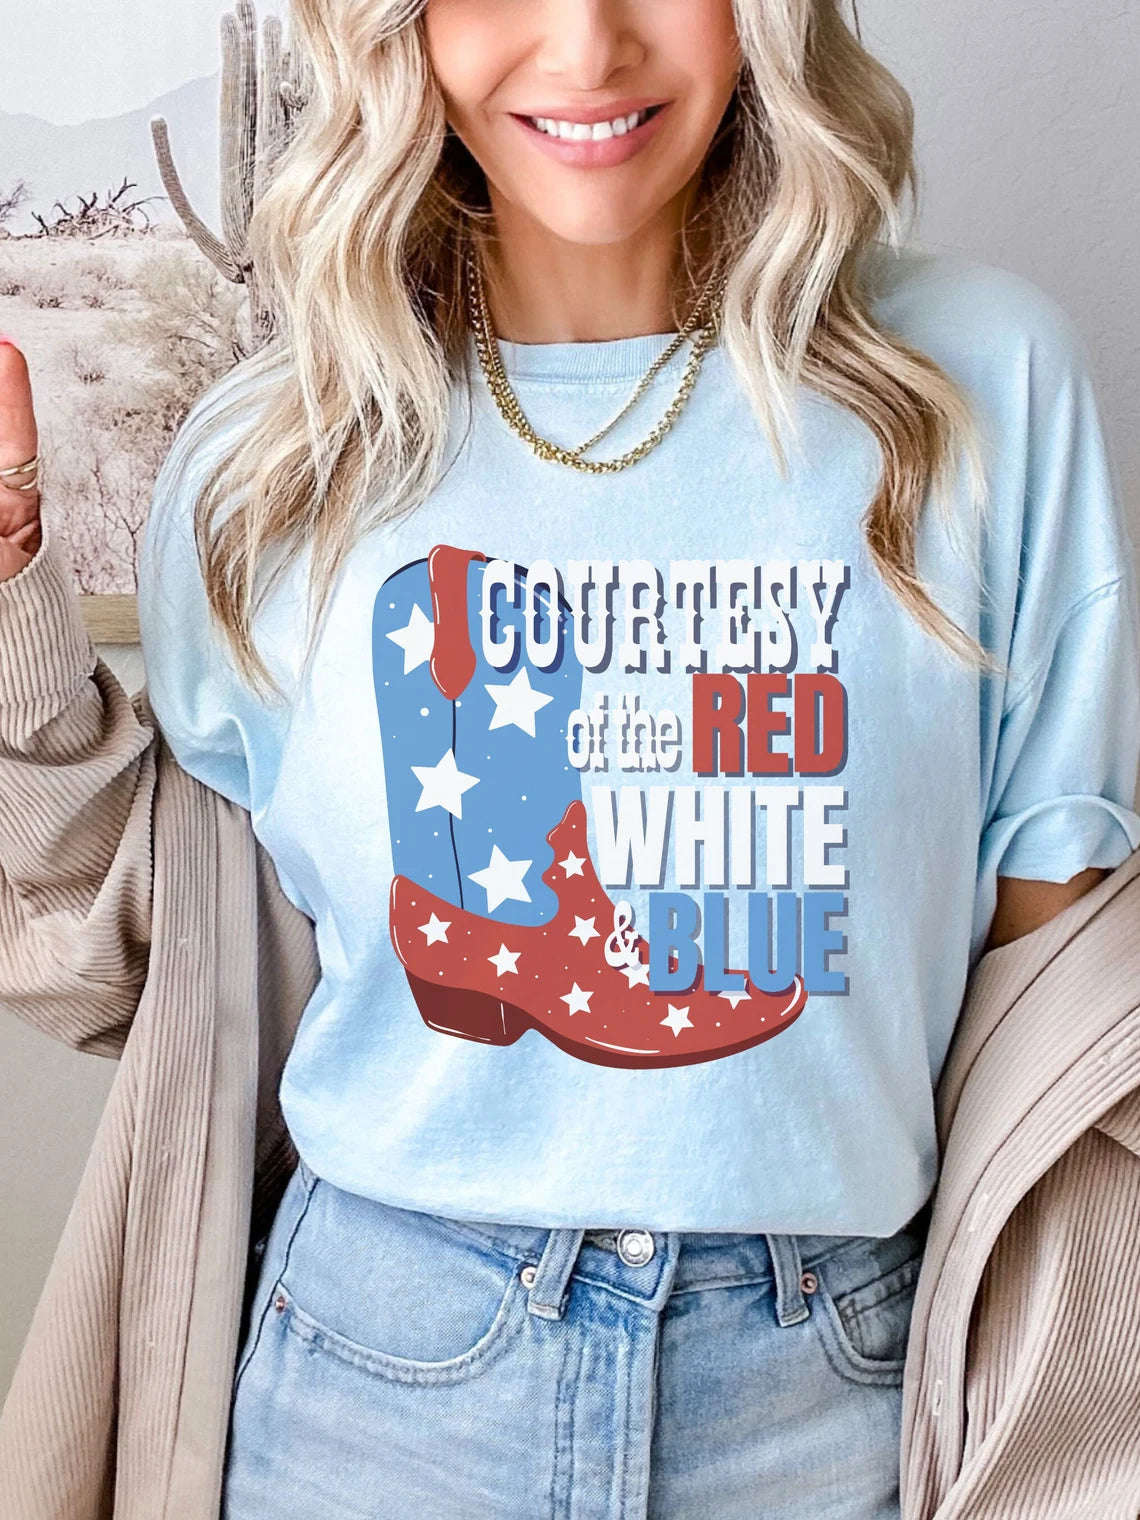 Courtesy of the Red White and Blue Graphic Tee